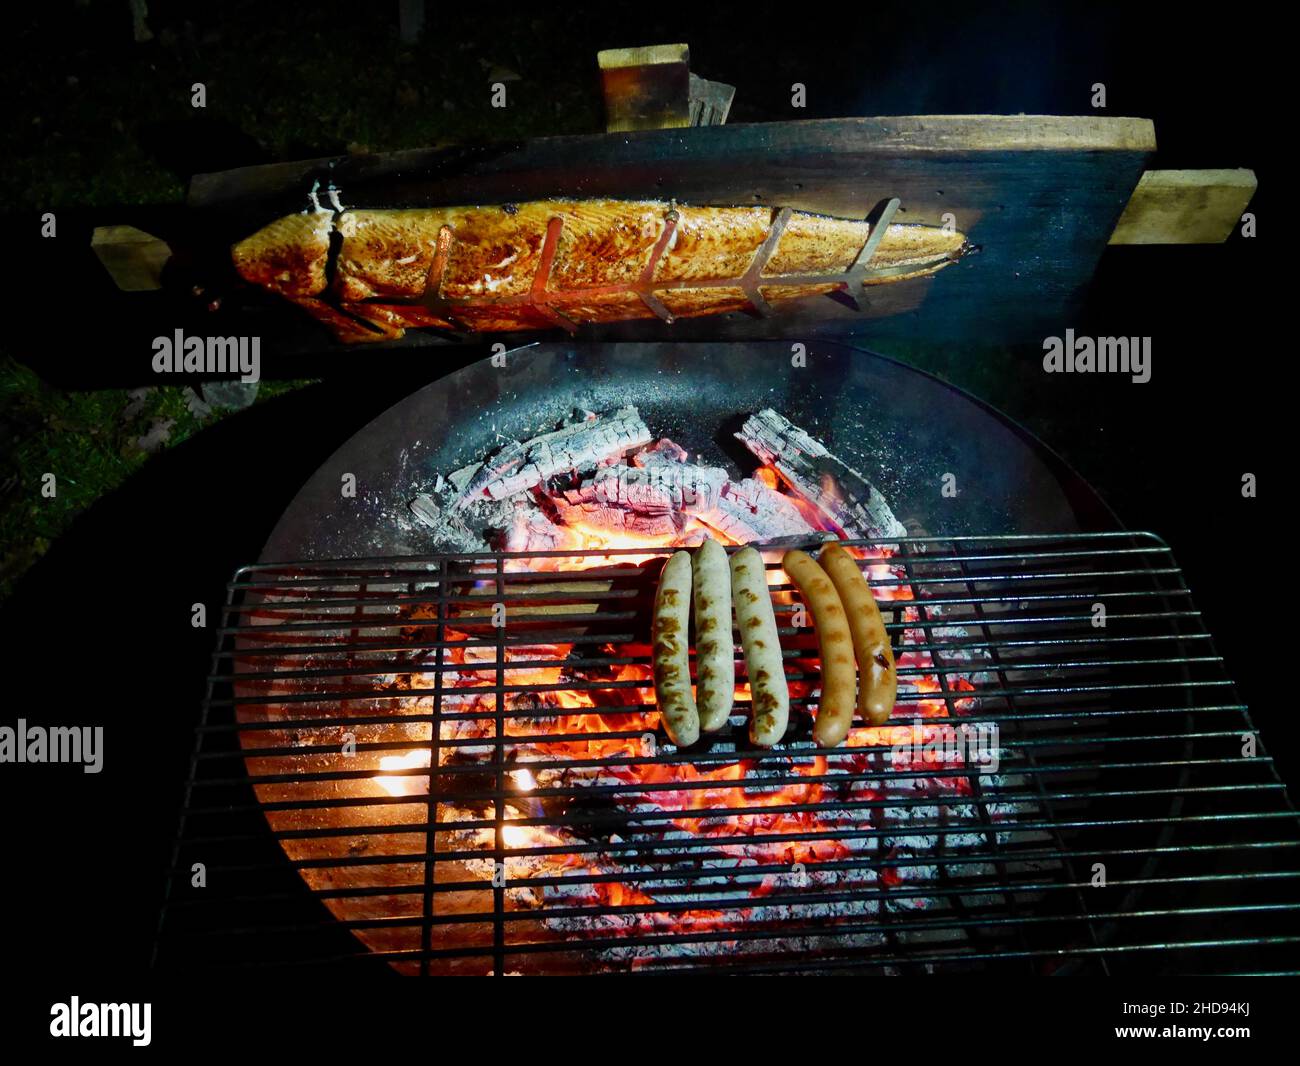 Flame grilled salmon, a traditional Nordic dish, and sausages on fire bowl,  at night. Aerial view Stock Photo - Alamy